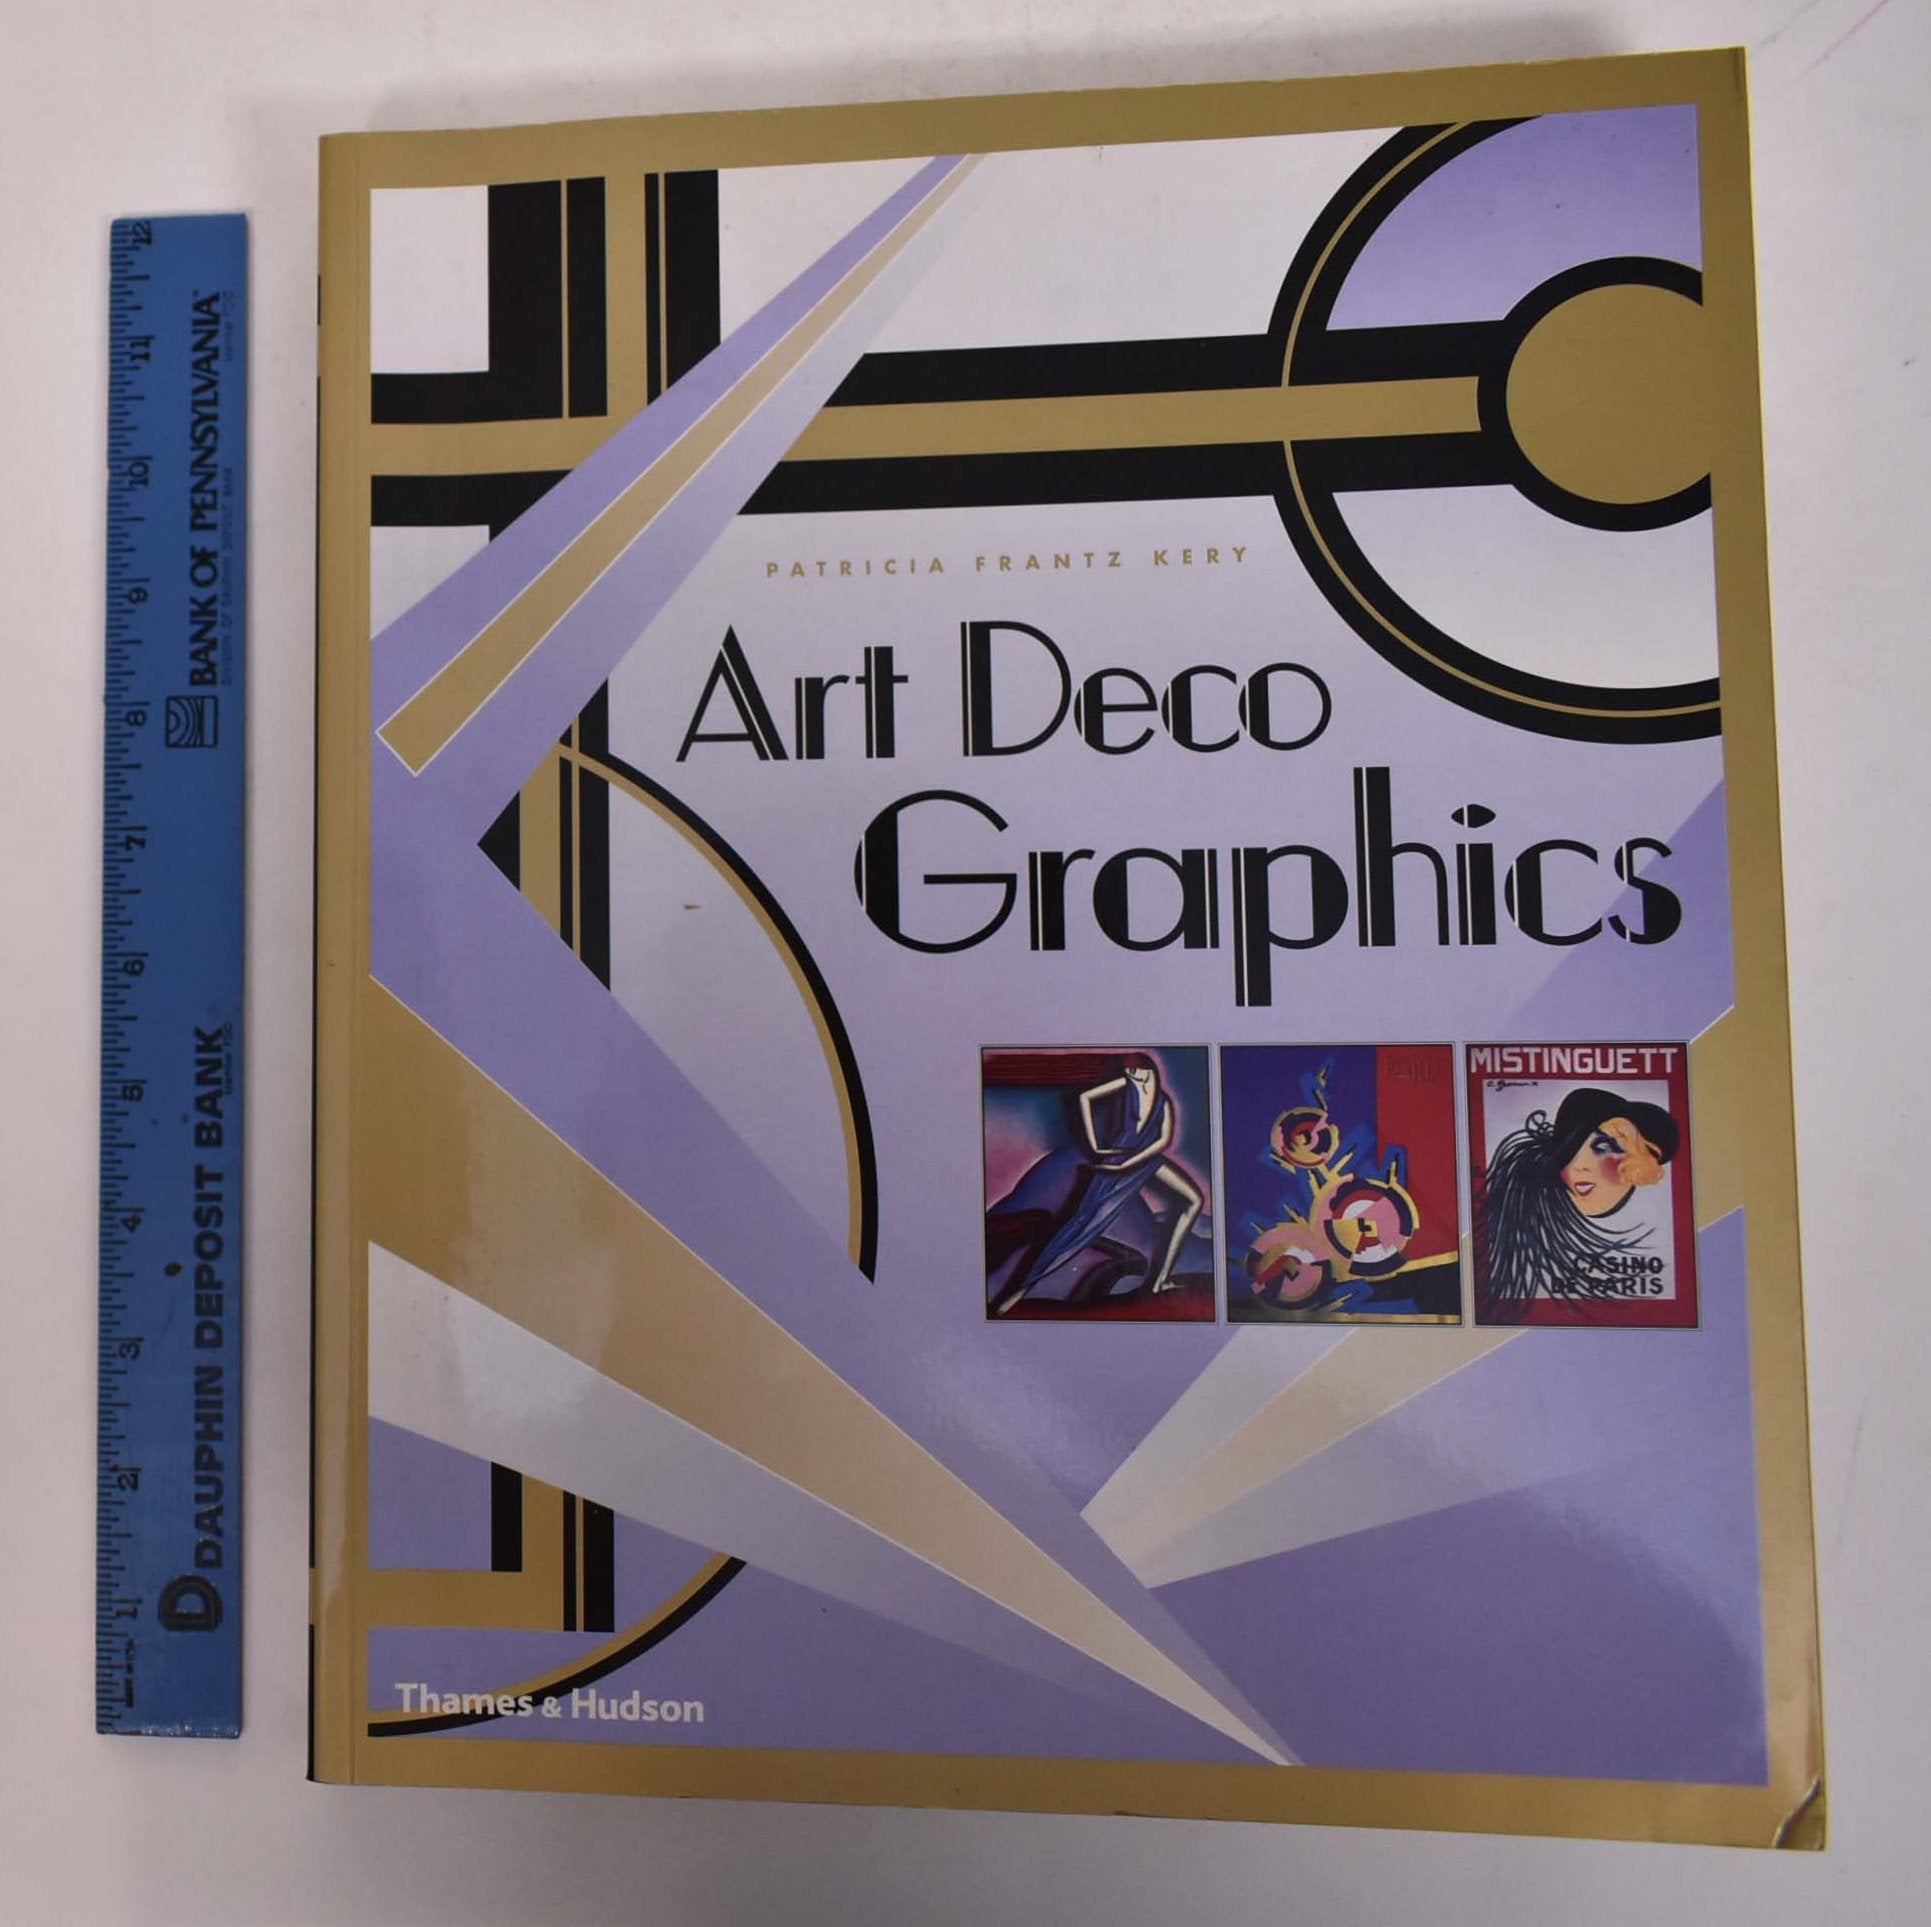 Art Deco Graphics by Patricia Frantz Kery on Mullen Books